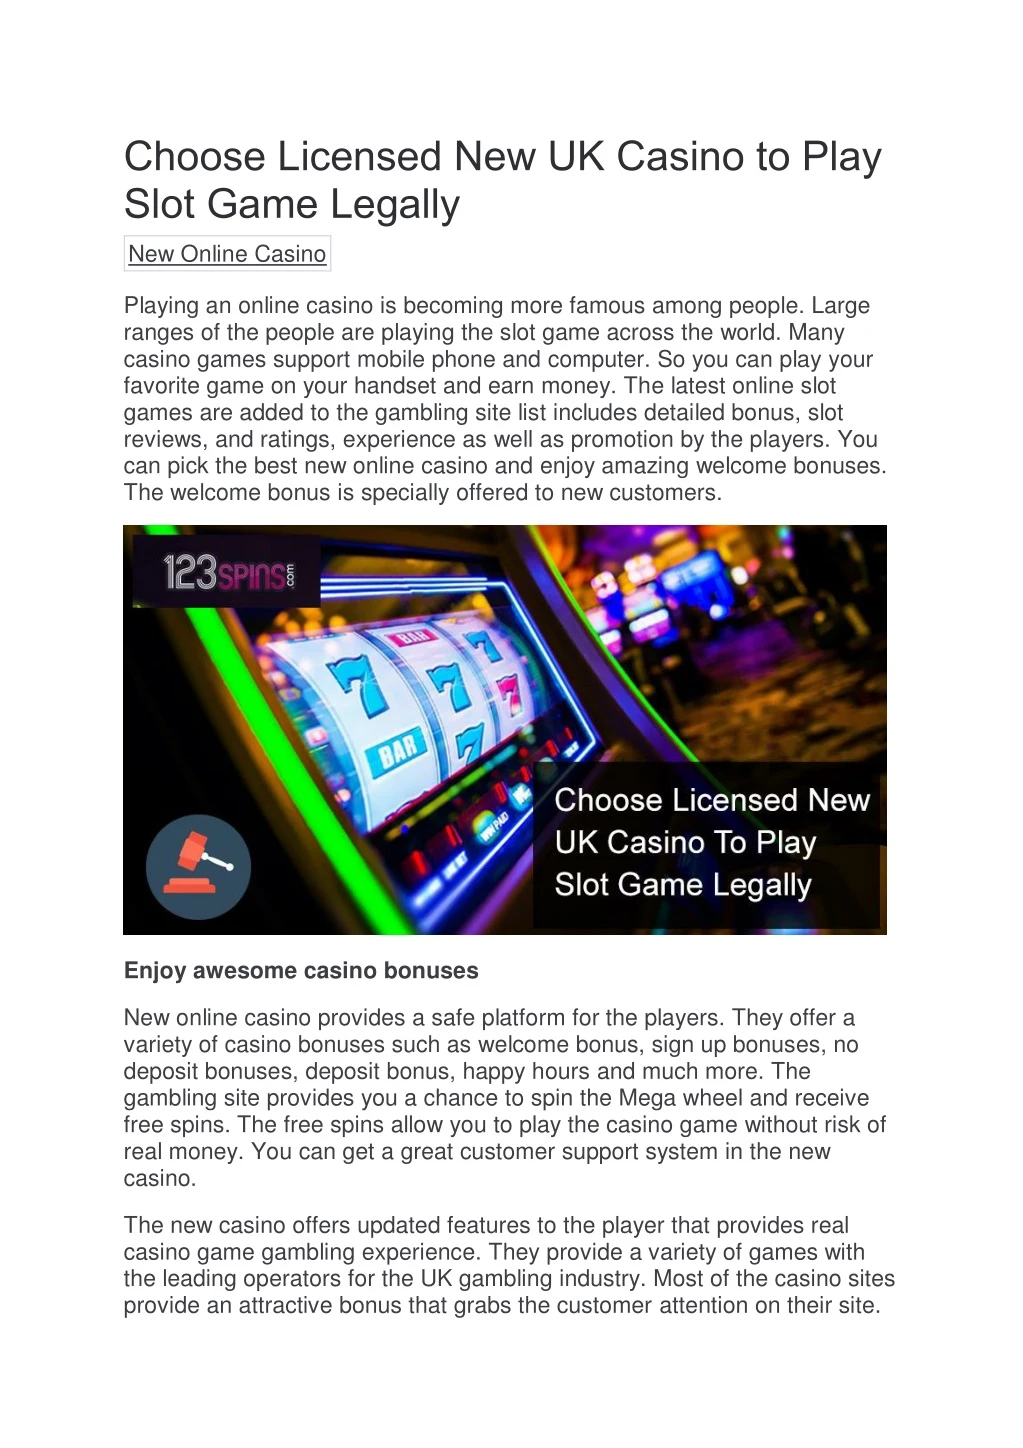 choose licensed new uk casino to play slot game